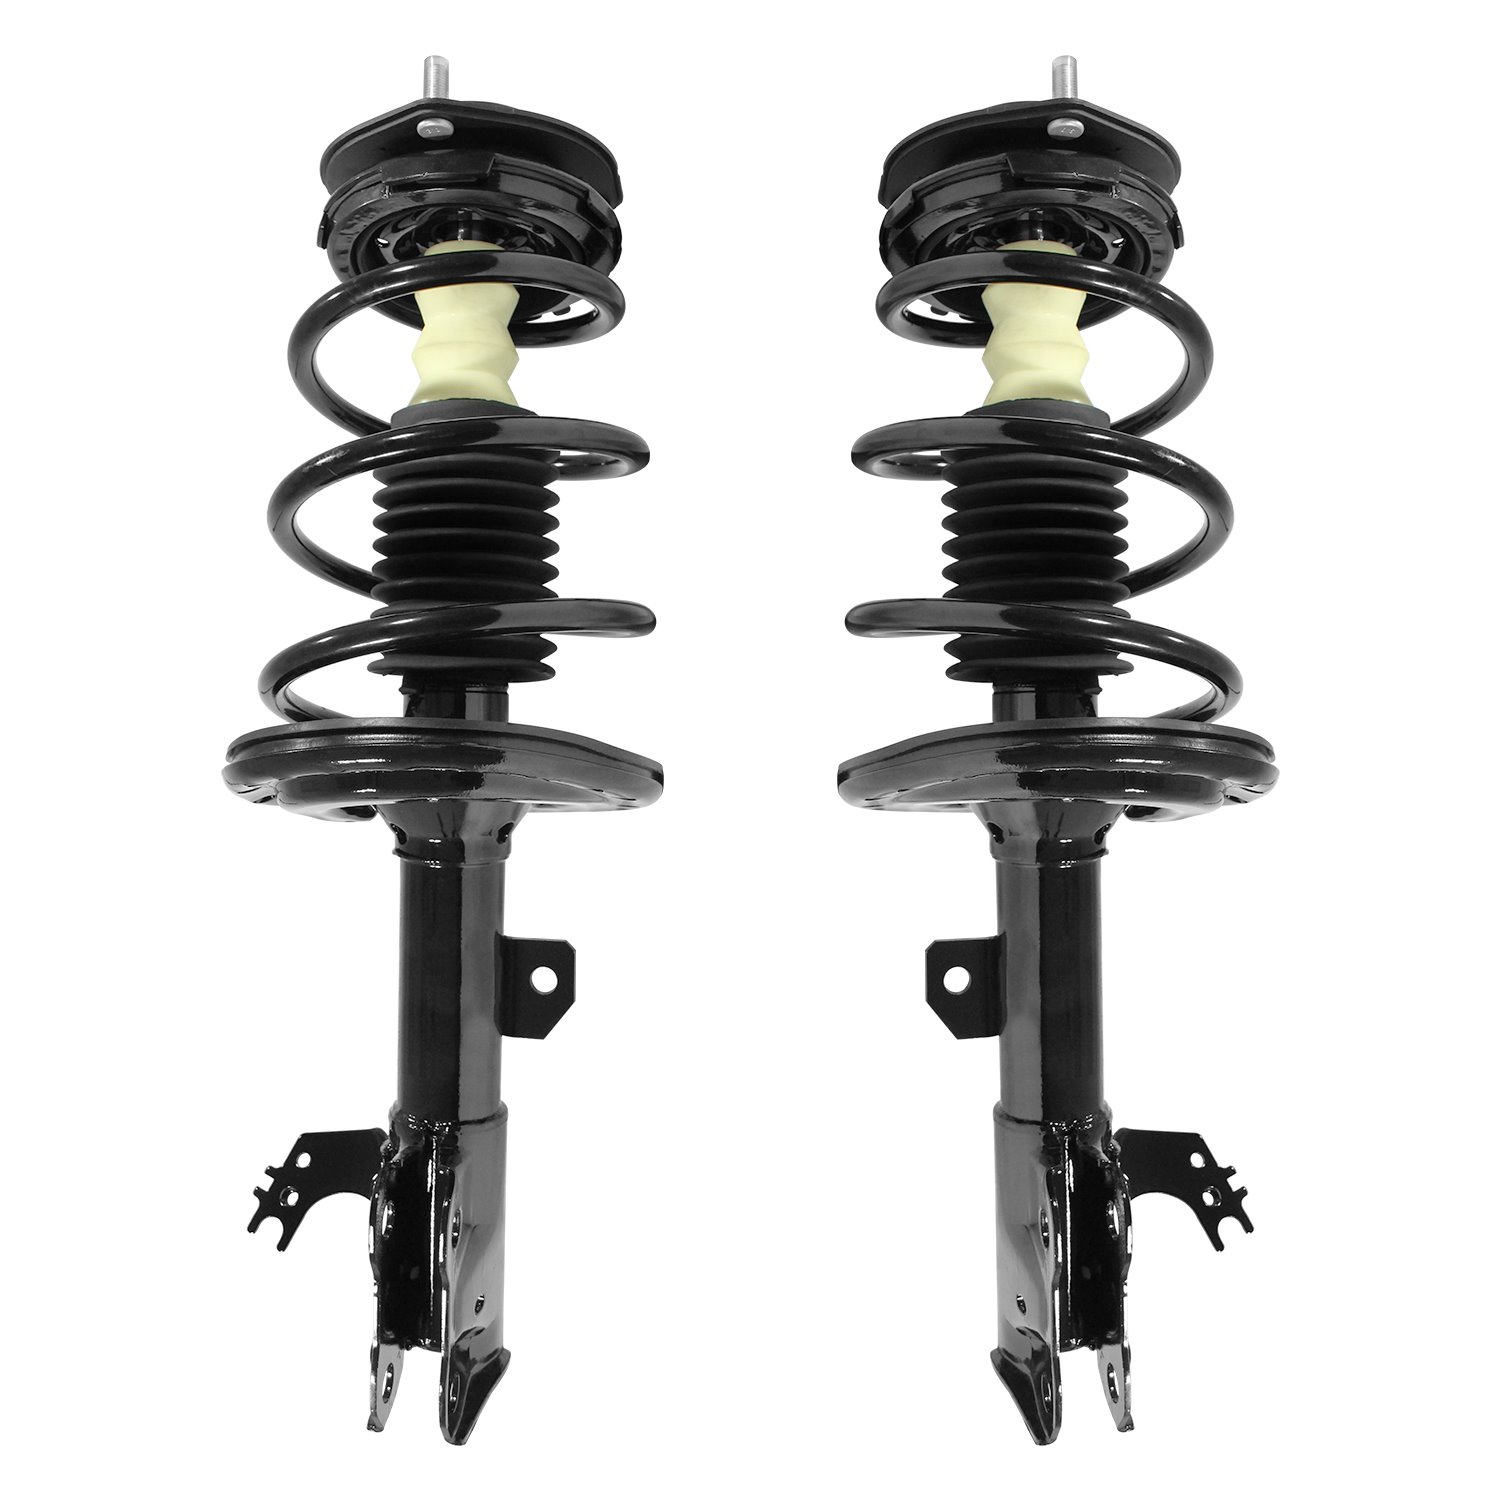 2-11693-11694-001 Suspension Strut & Coil Spring Assembly Set Fits Select Toyota Camry